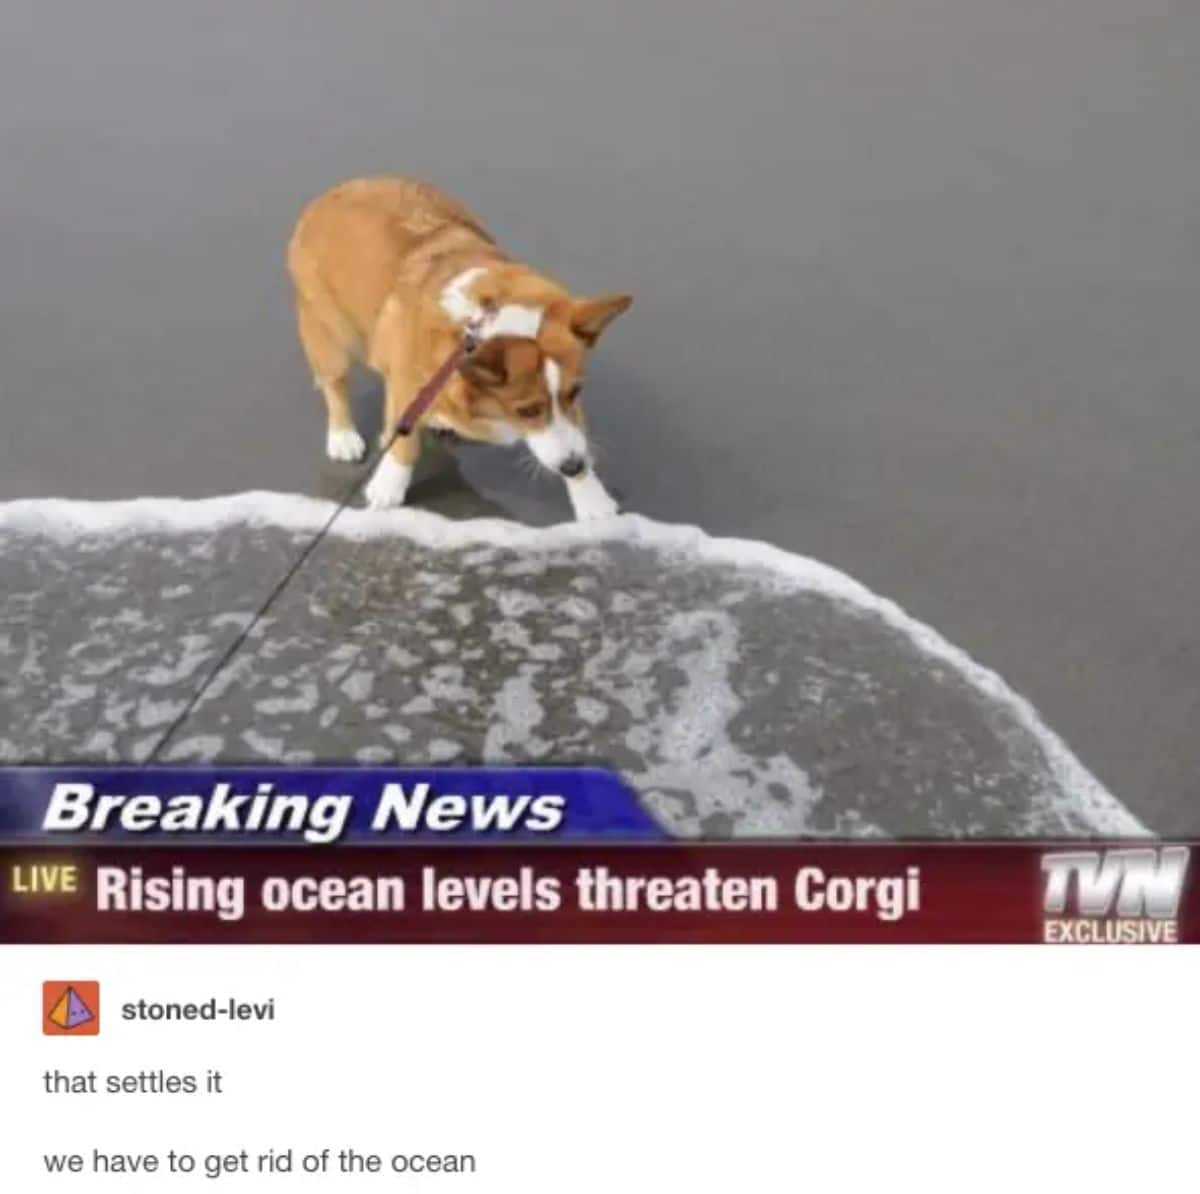 breaking news image of brown and white corgi at the ebach with water coming to it with caption saying rising ocean levels threaten Corgi